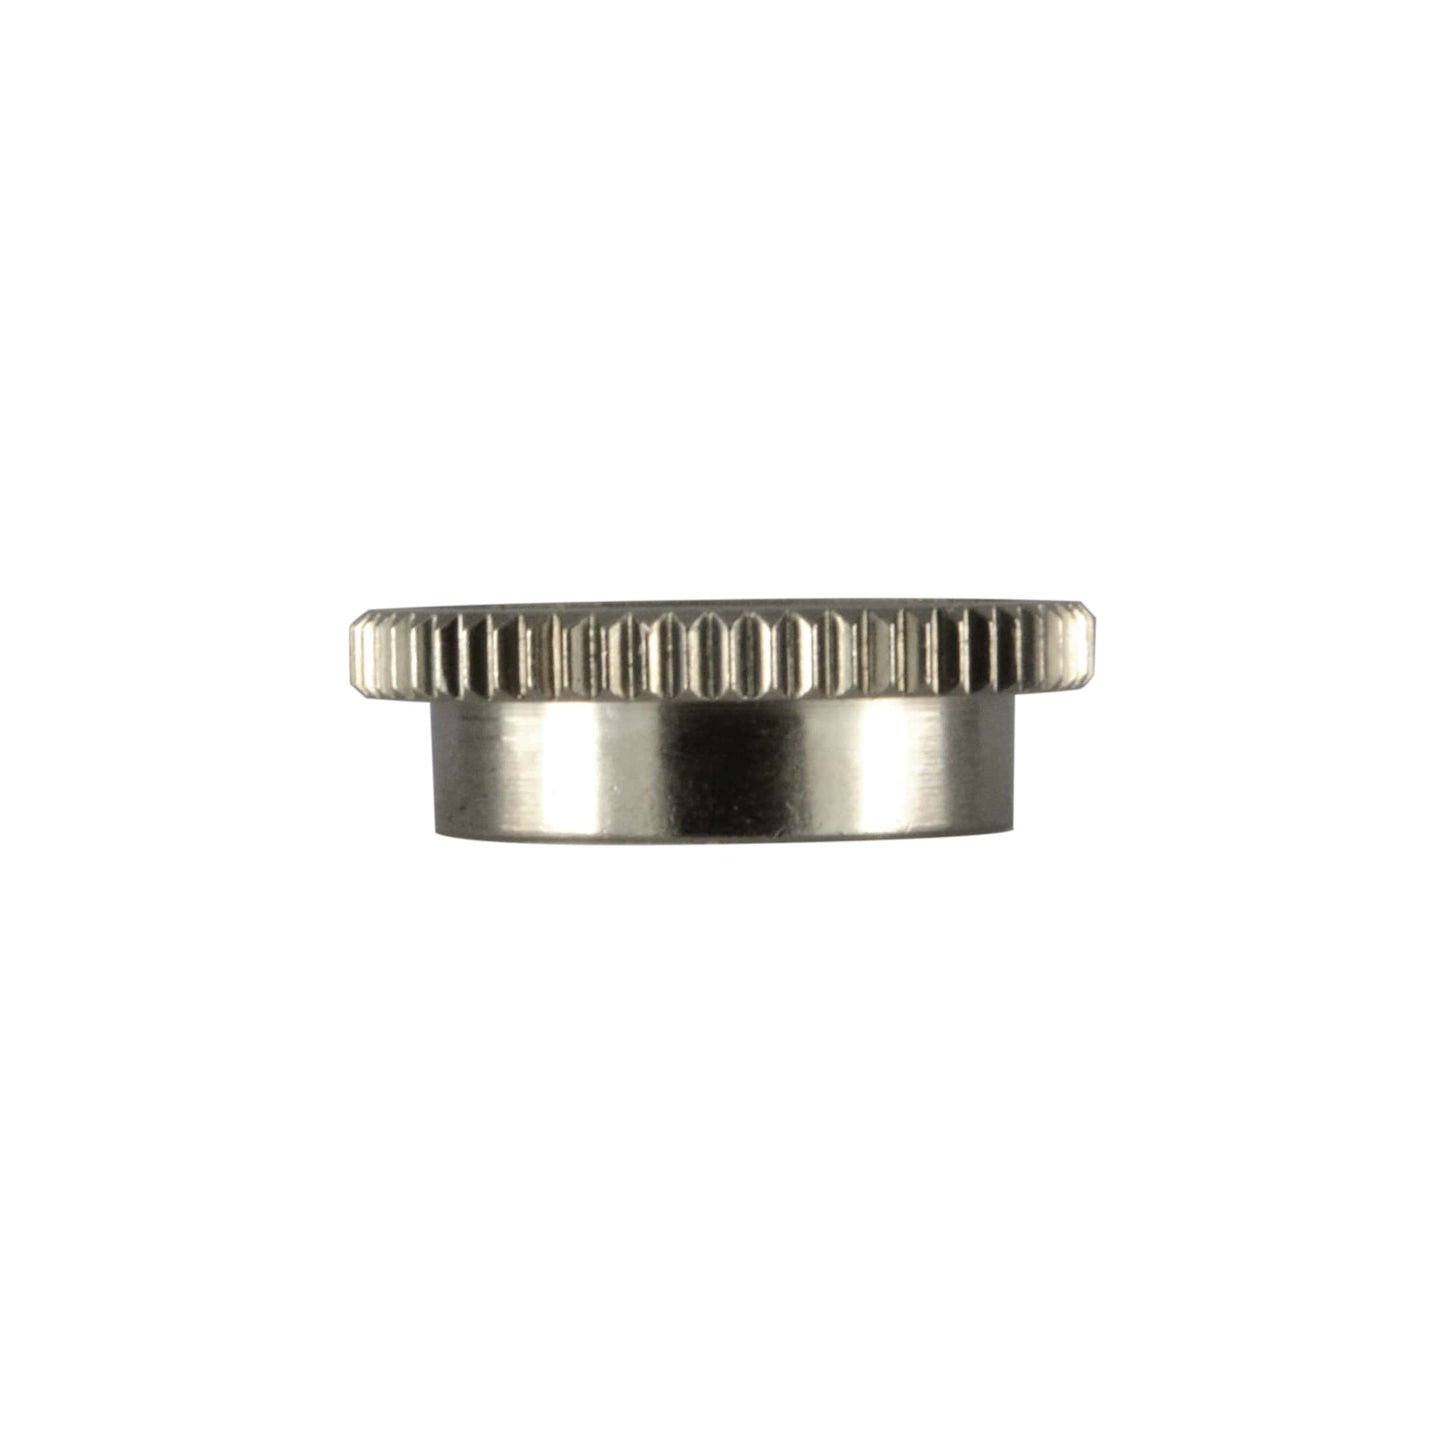 Deep Knurled Nut For 3 Way Toggle